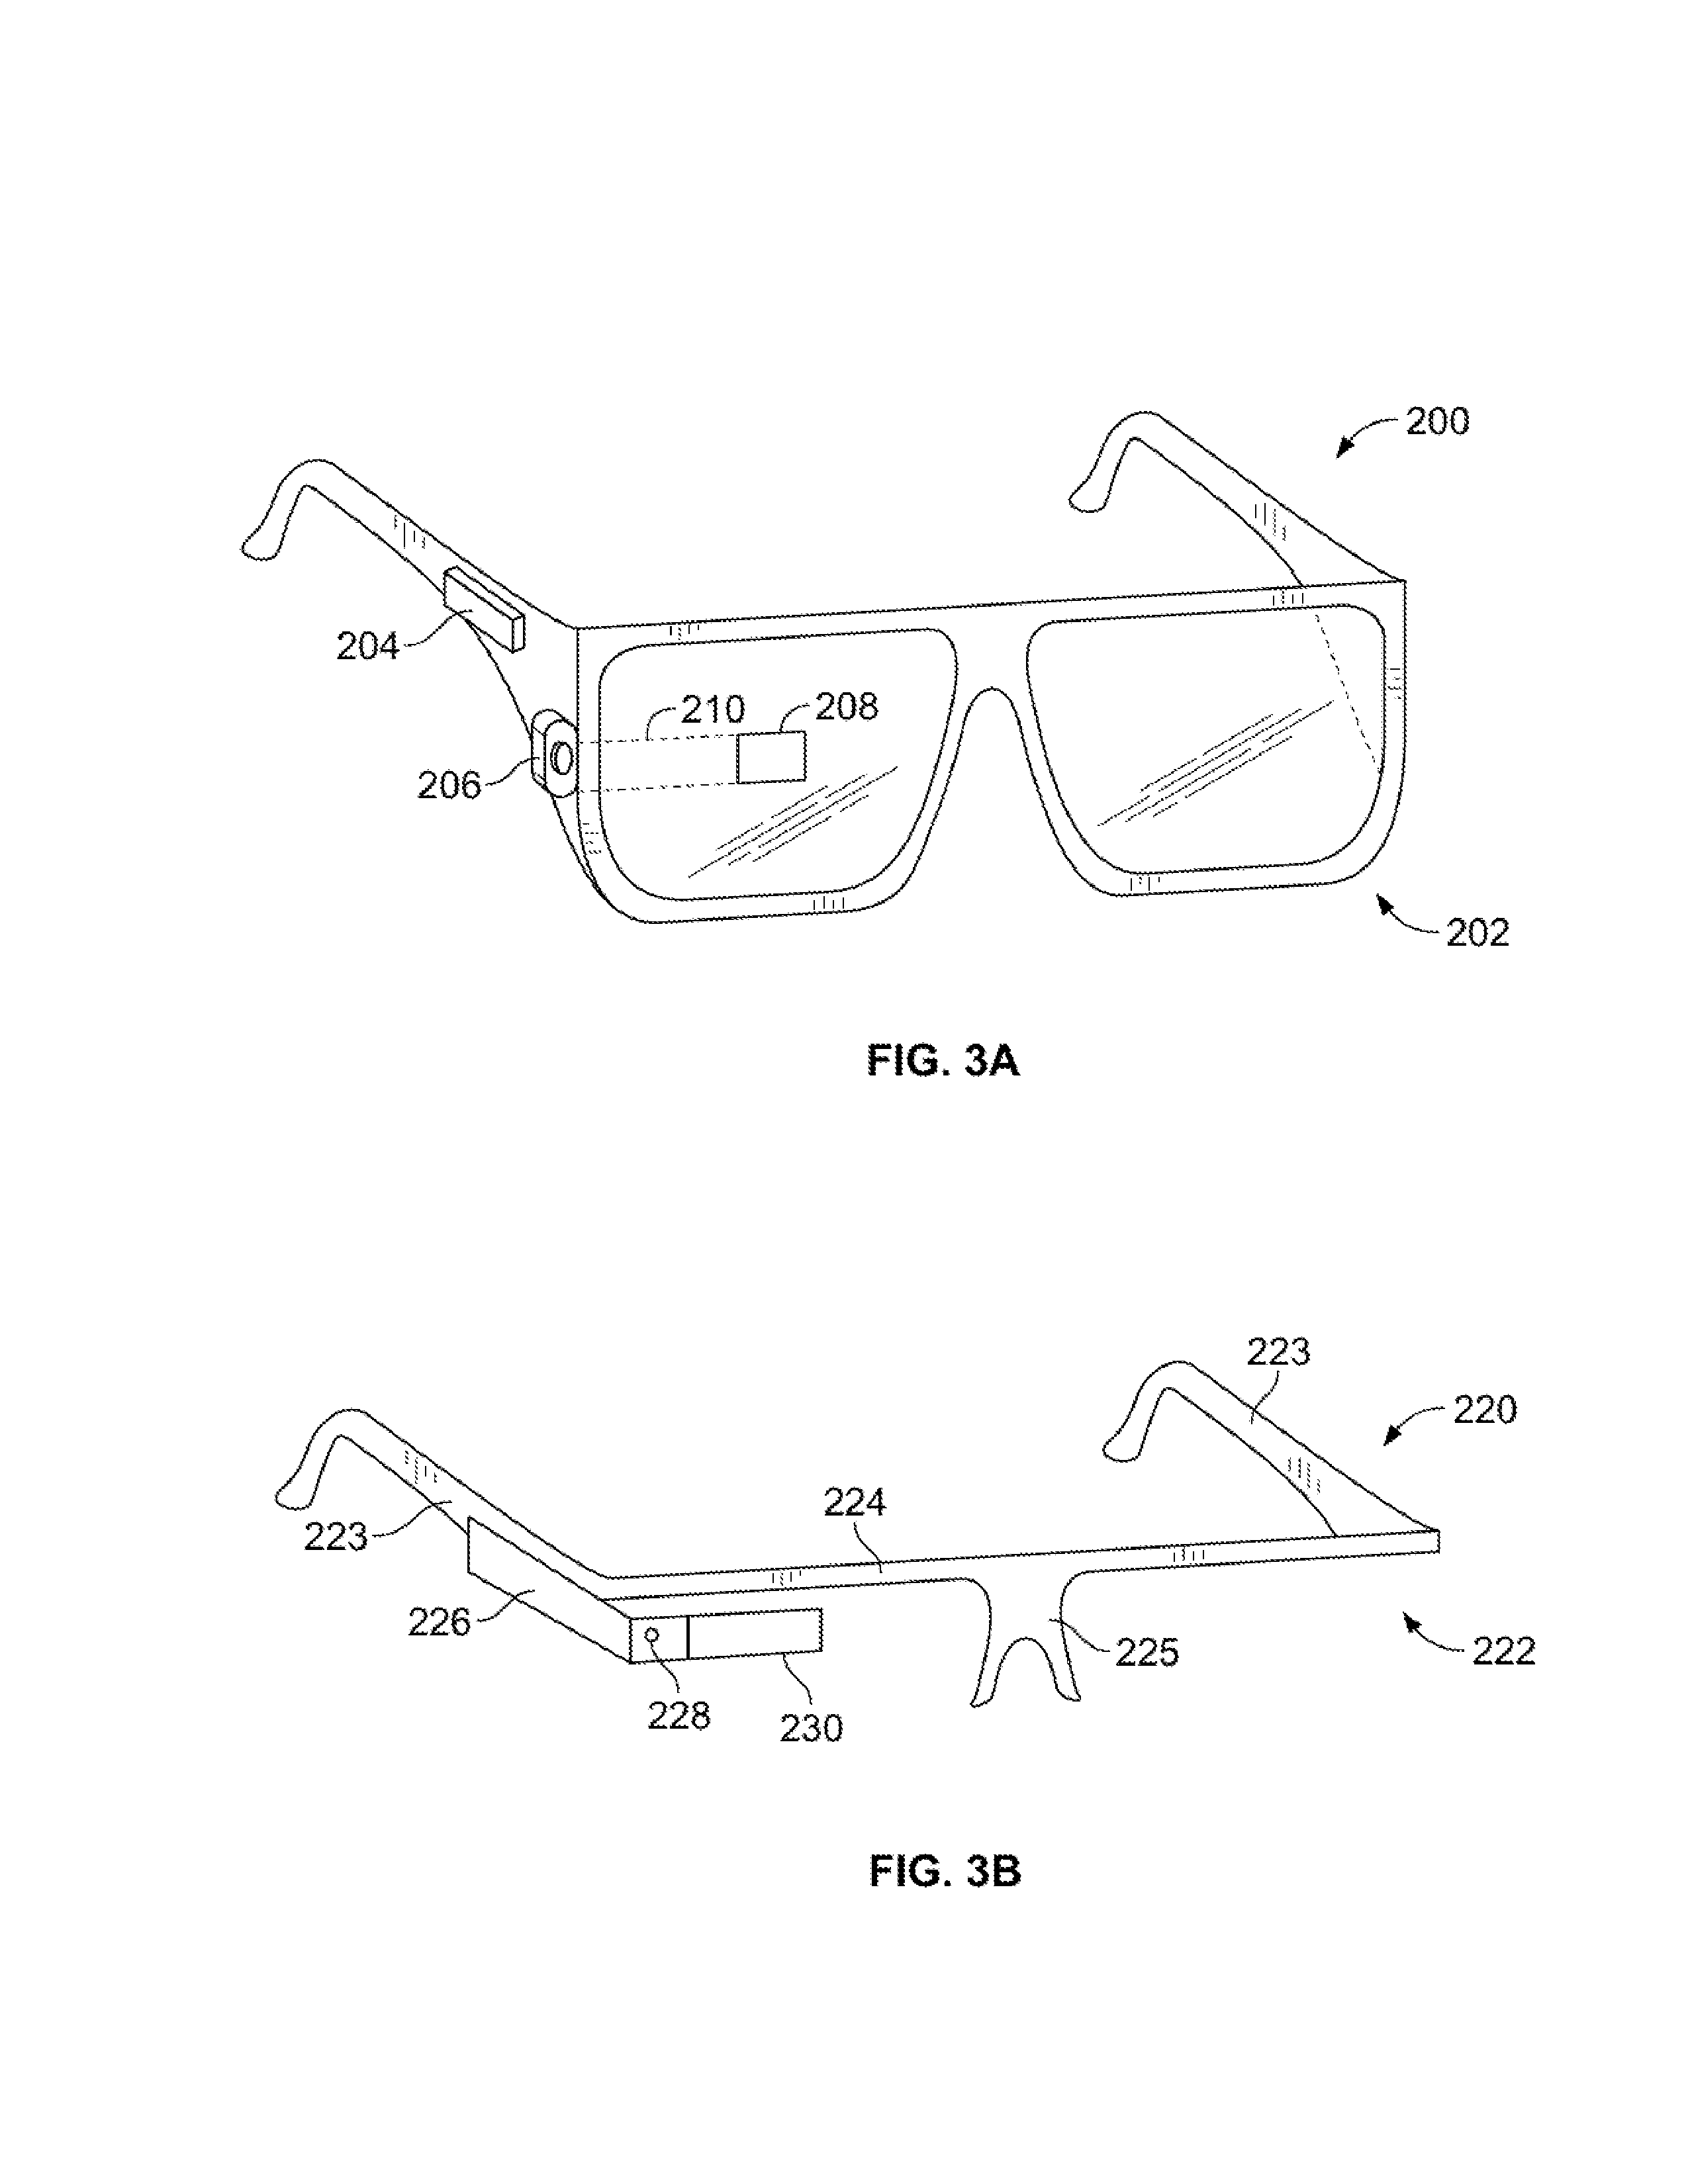 Wearable device assembly with input and output structures